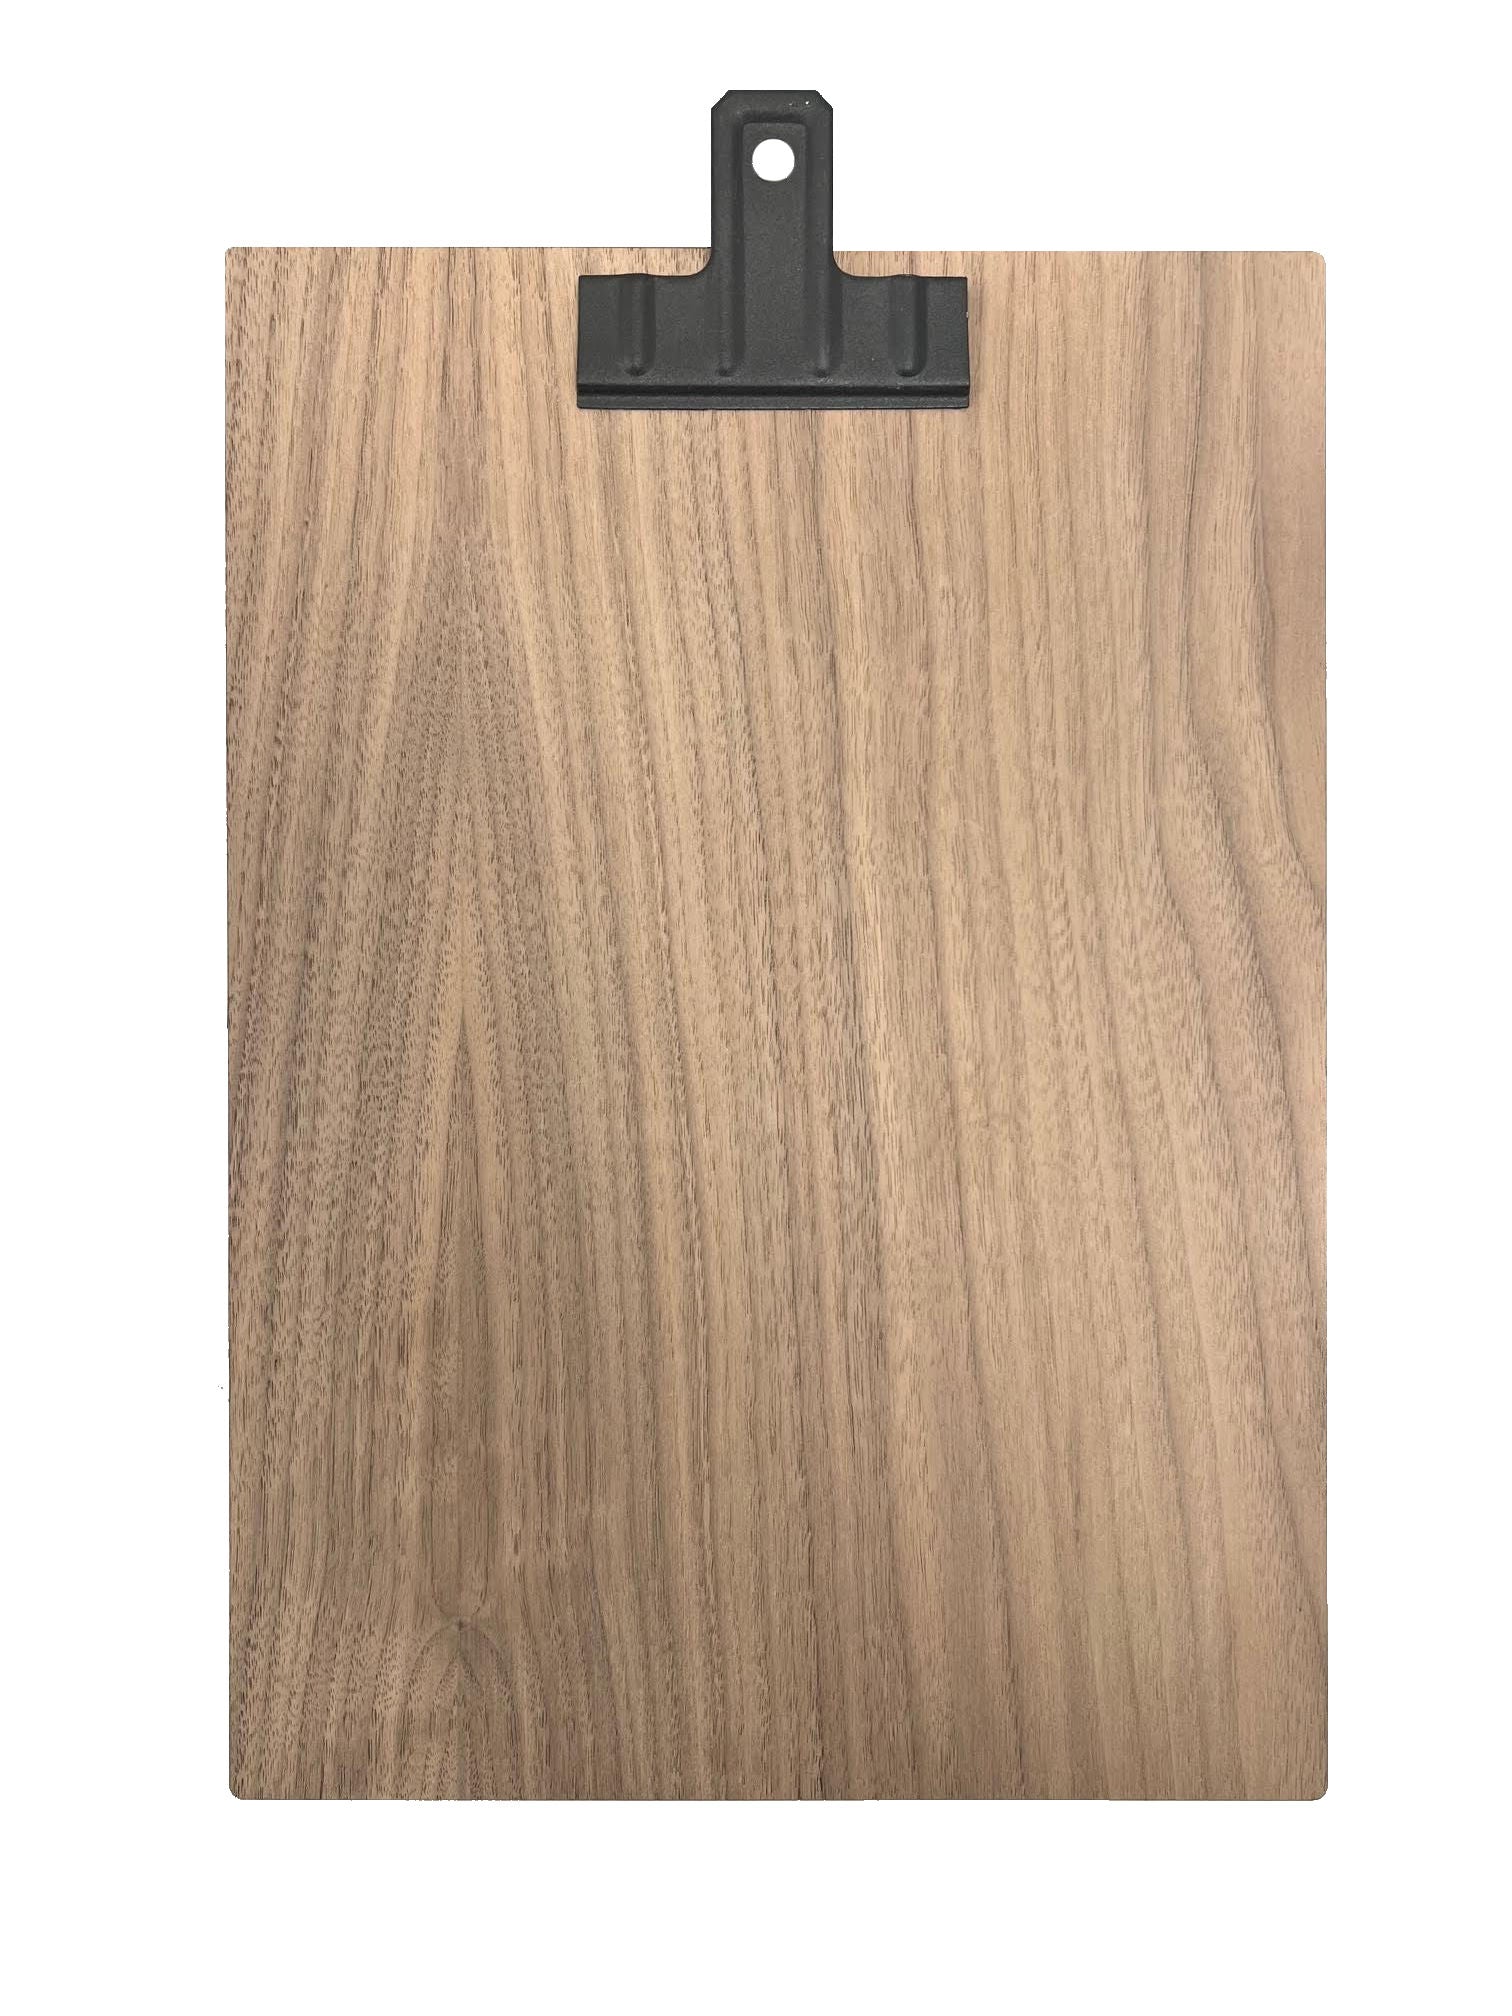 Branded Wooden Clipboard With Black Removable Clip (Sanded, Oiled and Waxed)